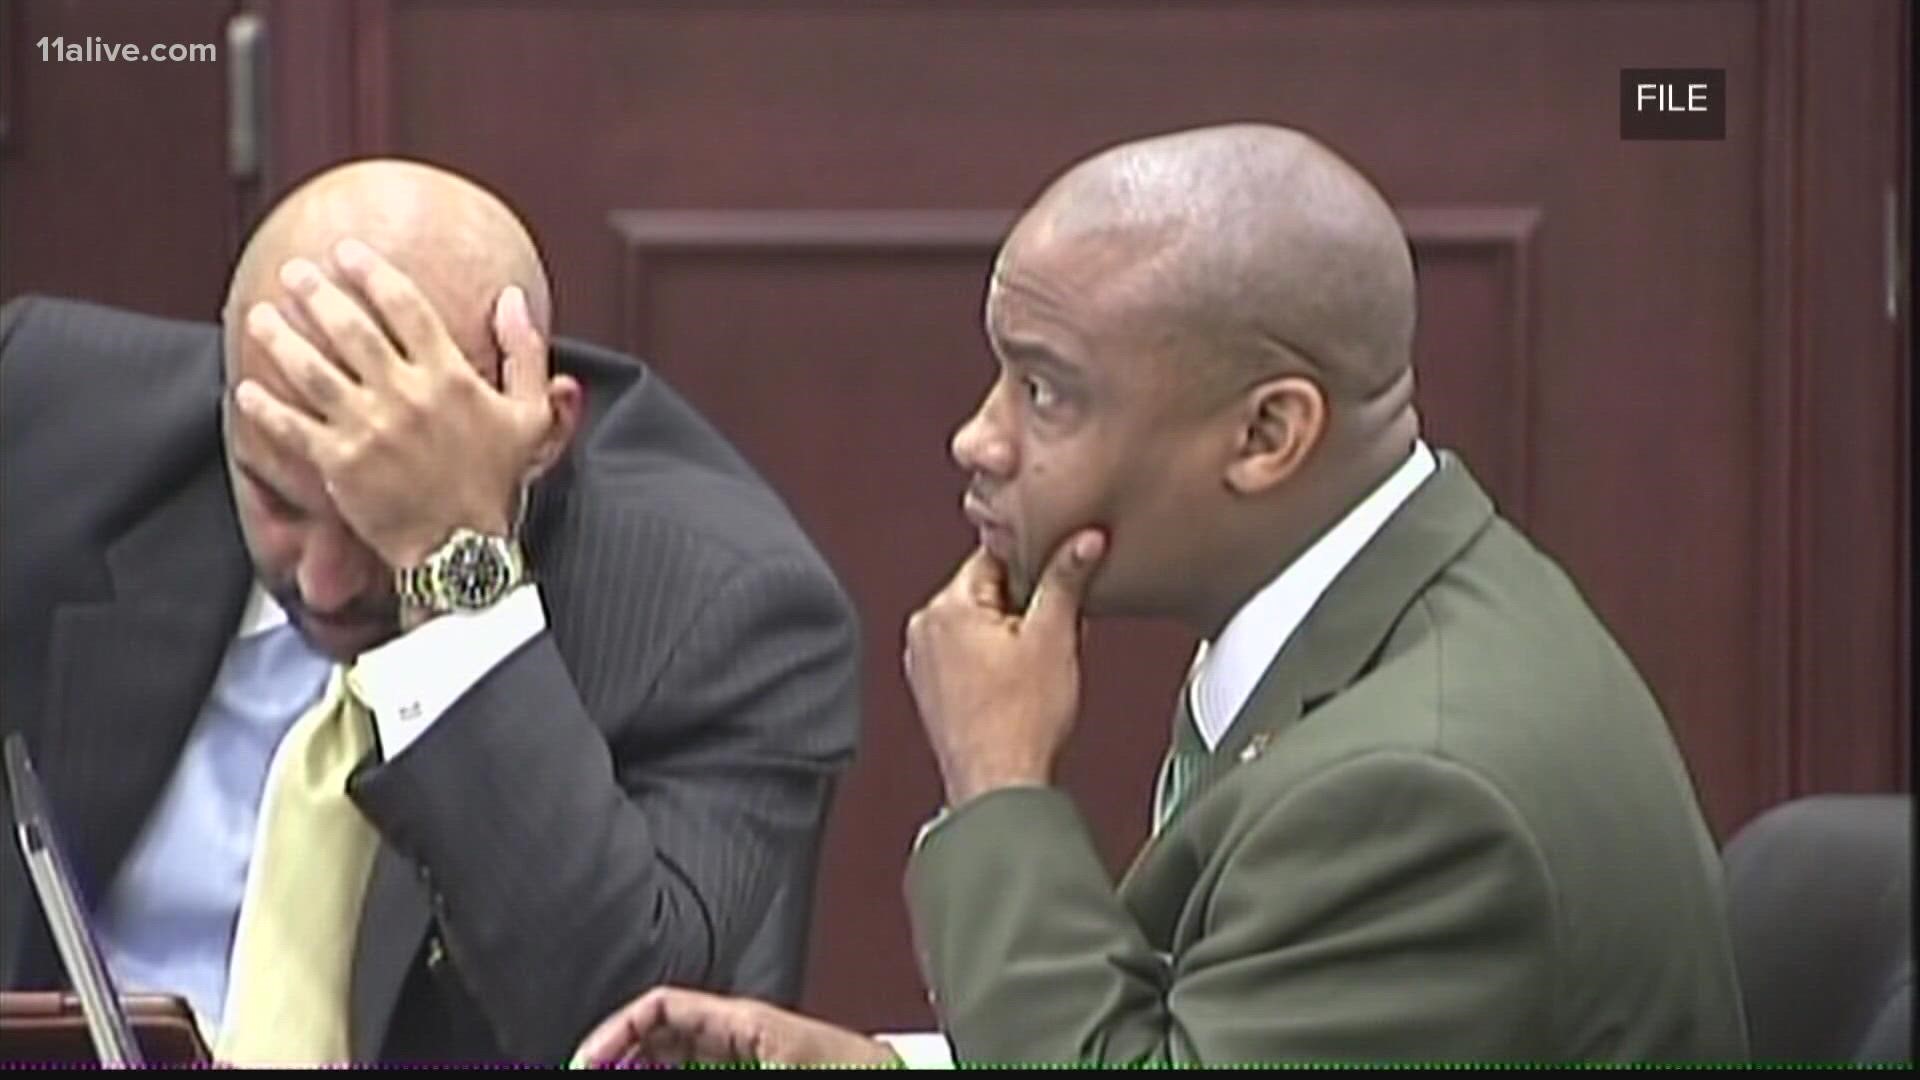 Back in October, attorneys for Hill filed paperwork to have him reinstated as the Clayton County Sheriff.